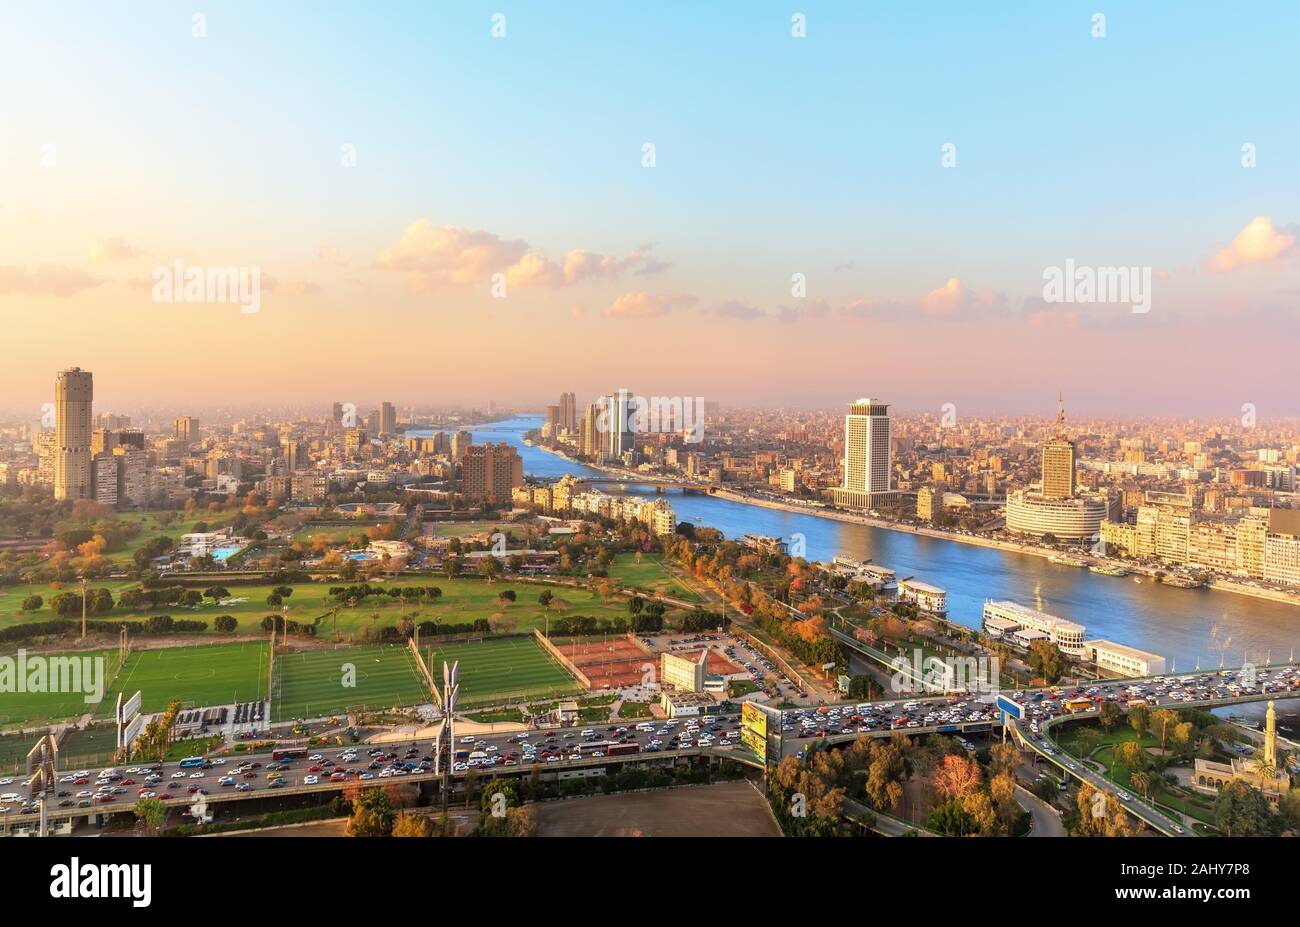 Aerial view on the downtown of Cairo and the Nile, Egypt. Stock Photo